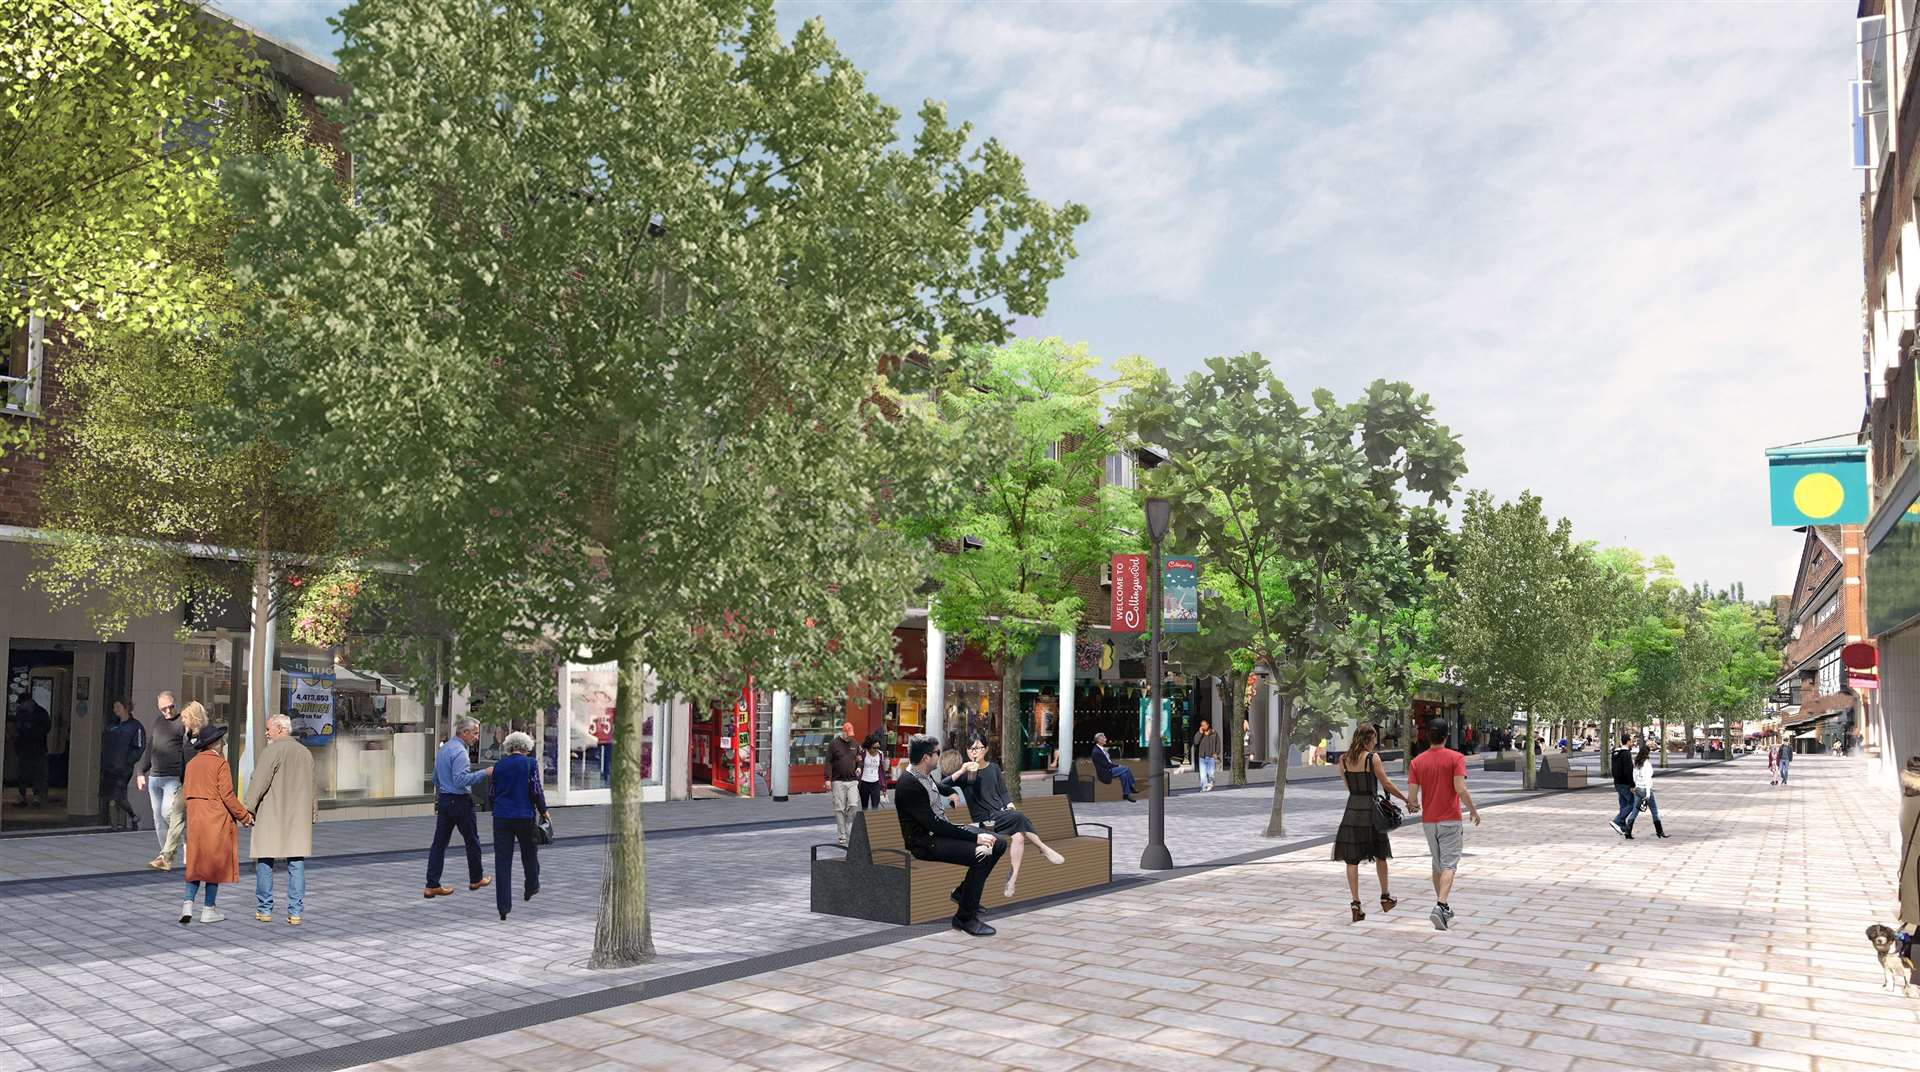 The vision for St George's Street in Canterbury